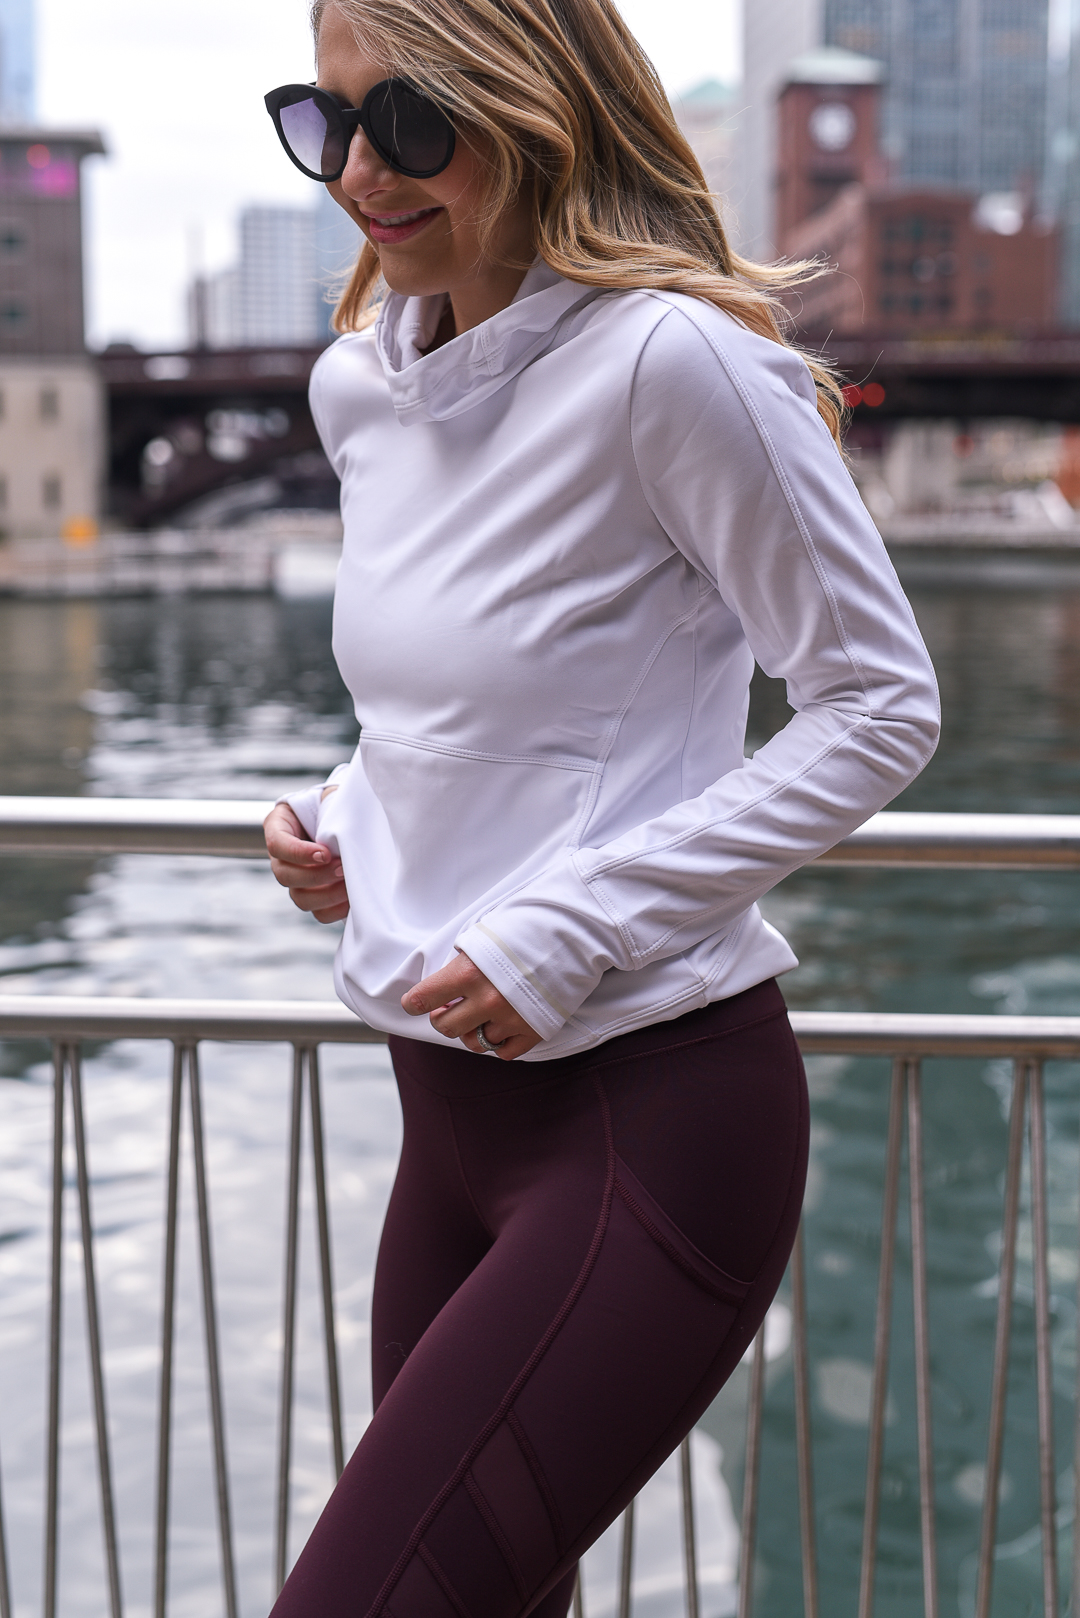 comfortable workout outerwear for winter - What is Pure Barre? by popular Chicago lifestyle blogger Visions of Vogue